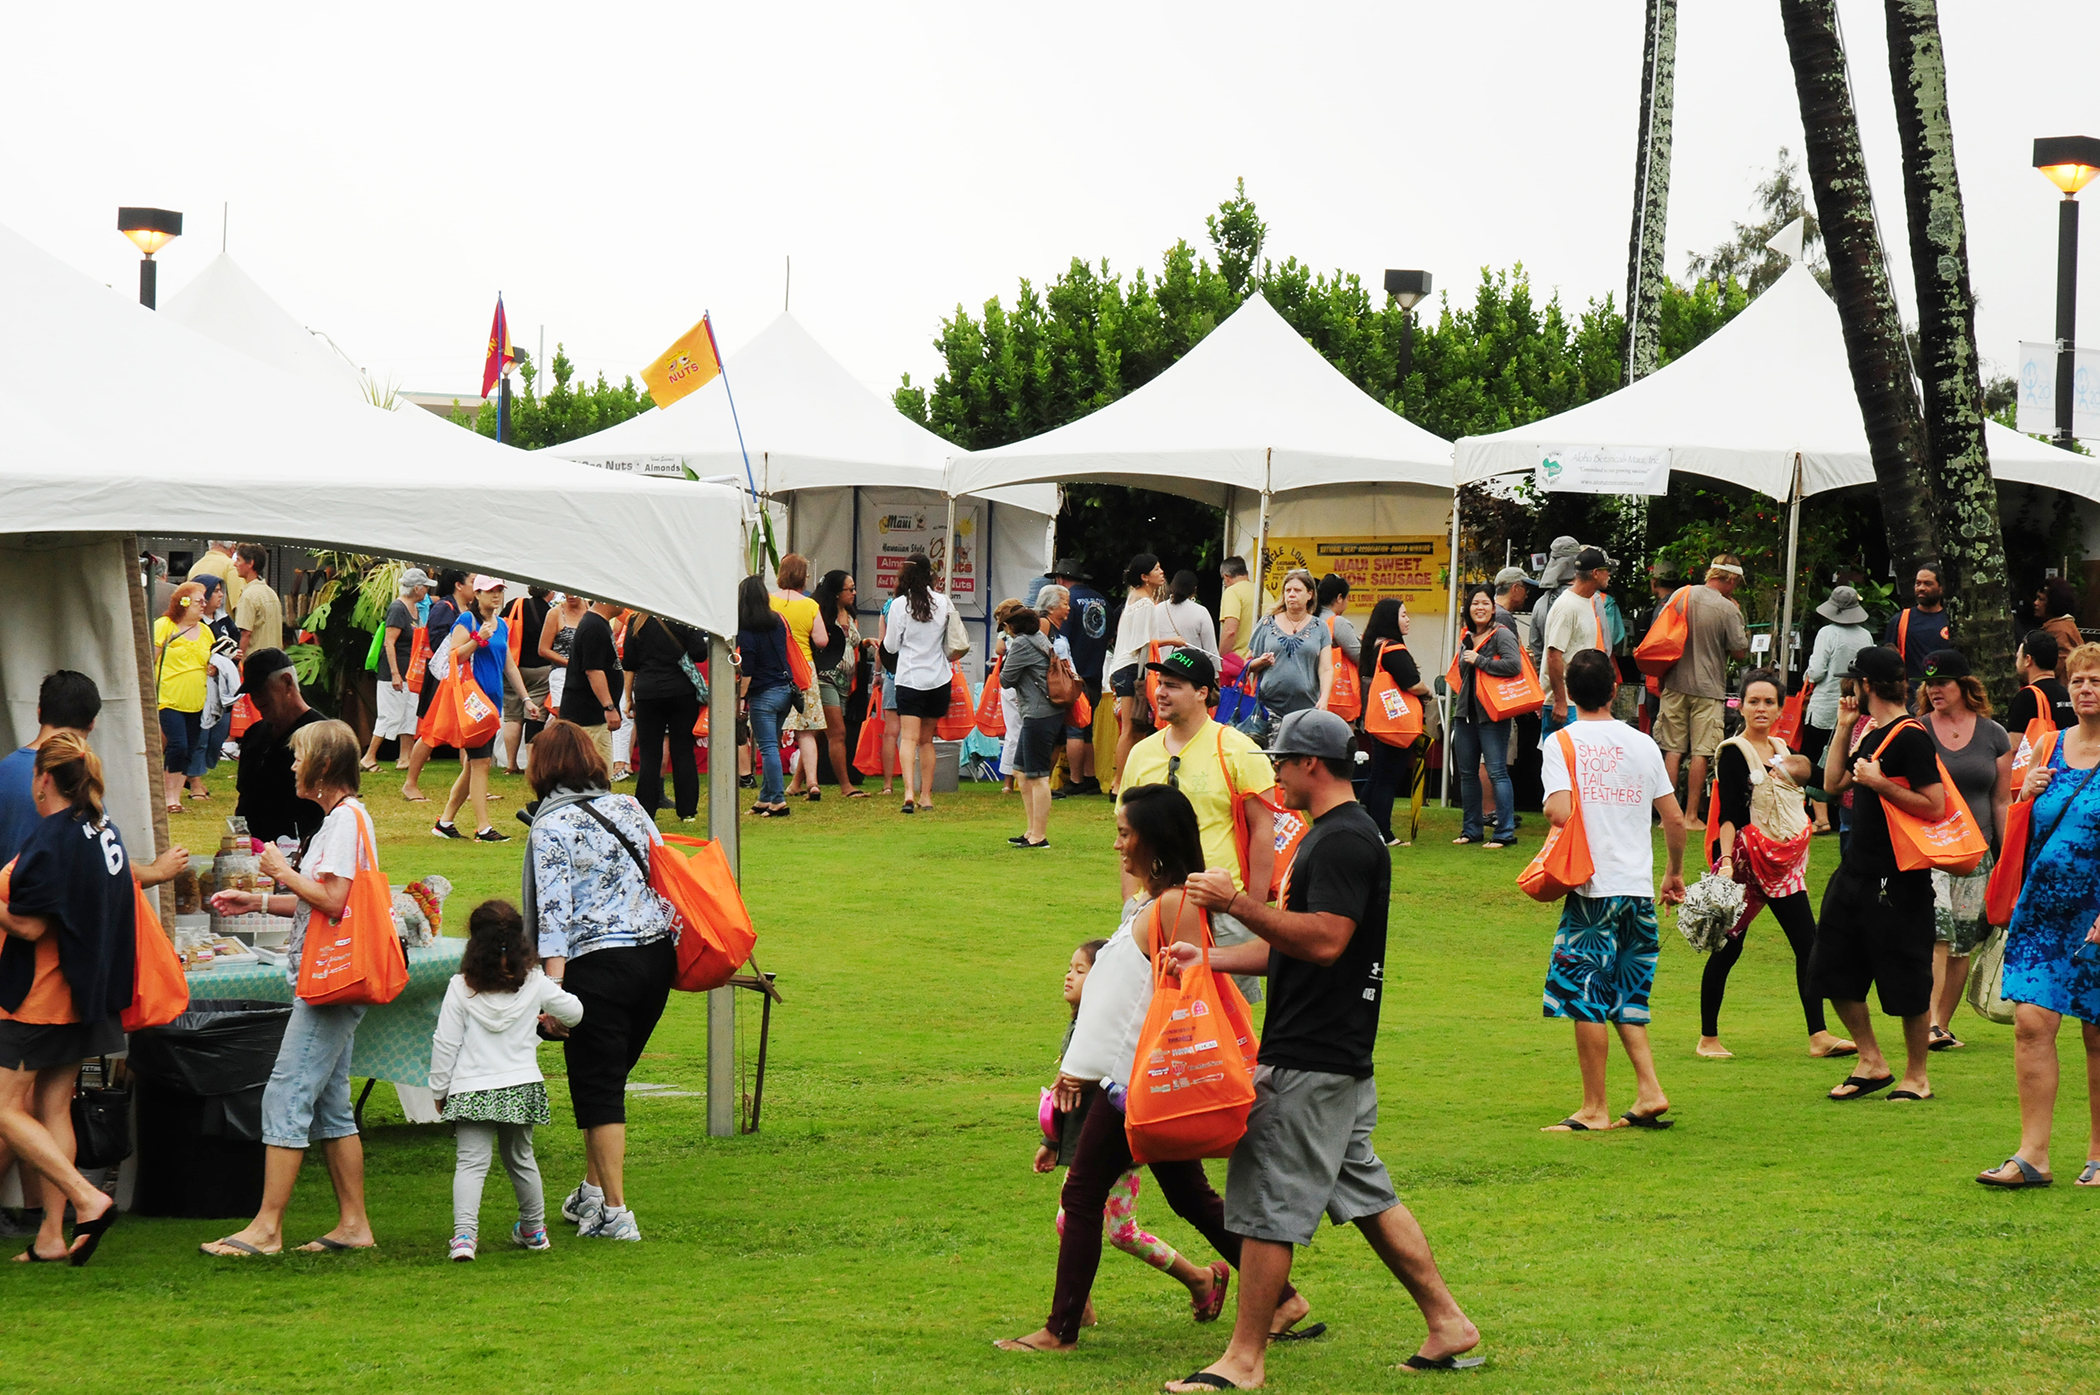 The inaugural Made in Maui County Festival in 2014 attracted thousands of visitors and residents for a full day of shopping, activities, food and fun. This year, the Festival’s organizers anticipate the event will be bigger and better than ever. Maui County photo.